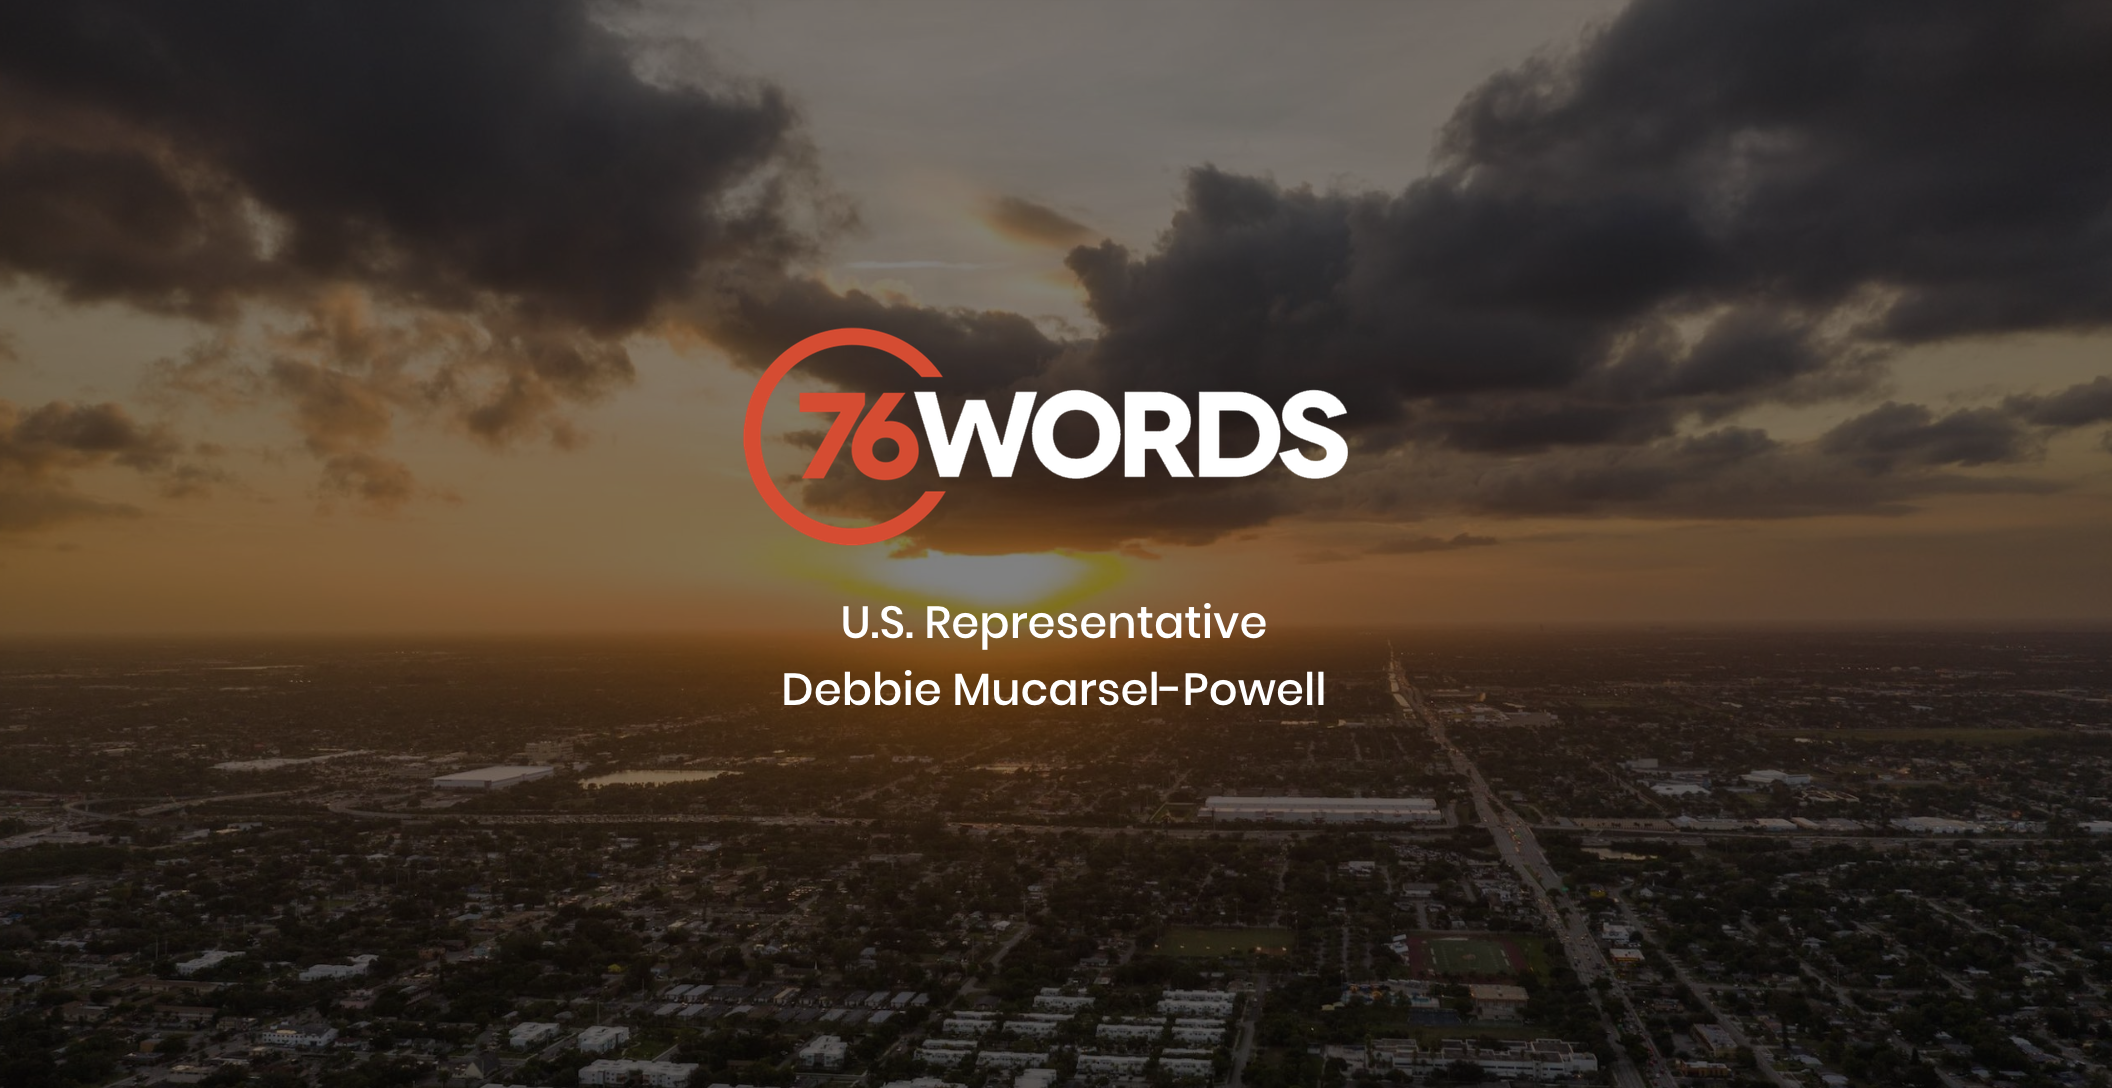 IU C&I Studios Page White and orange 76 Words U.S. Representative Debbie Mucarsel Powell logo with dimmed background showing aerial view of a city with the sun setting in the background